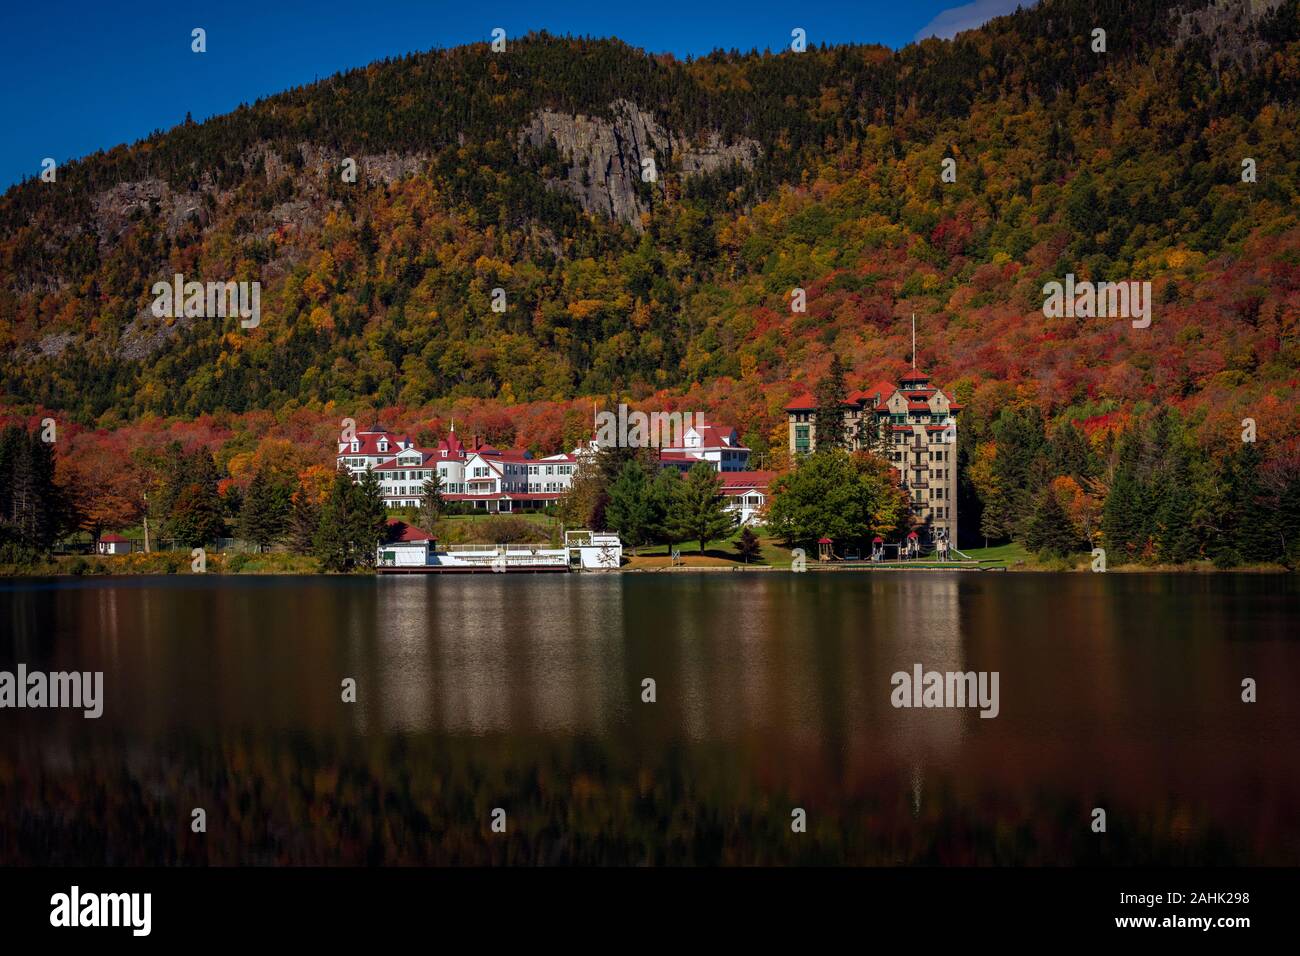 Dixville Notch, New Hampshire, USA - September 30, 2019:  The Balsam Resort is slated to be redeveloped as a major ski area. Stock Photo